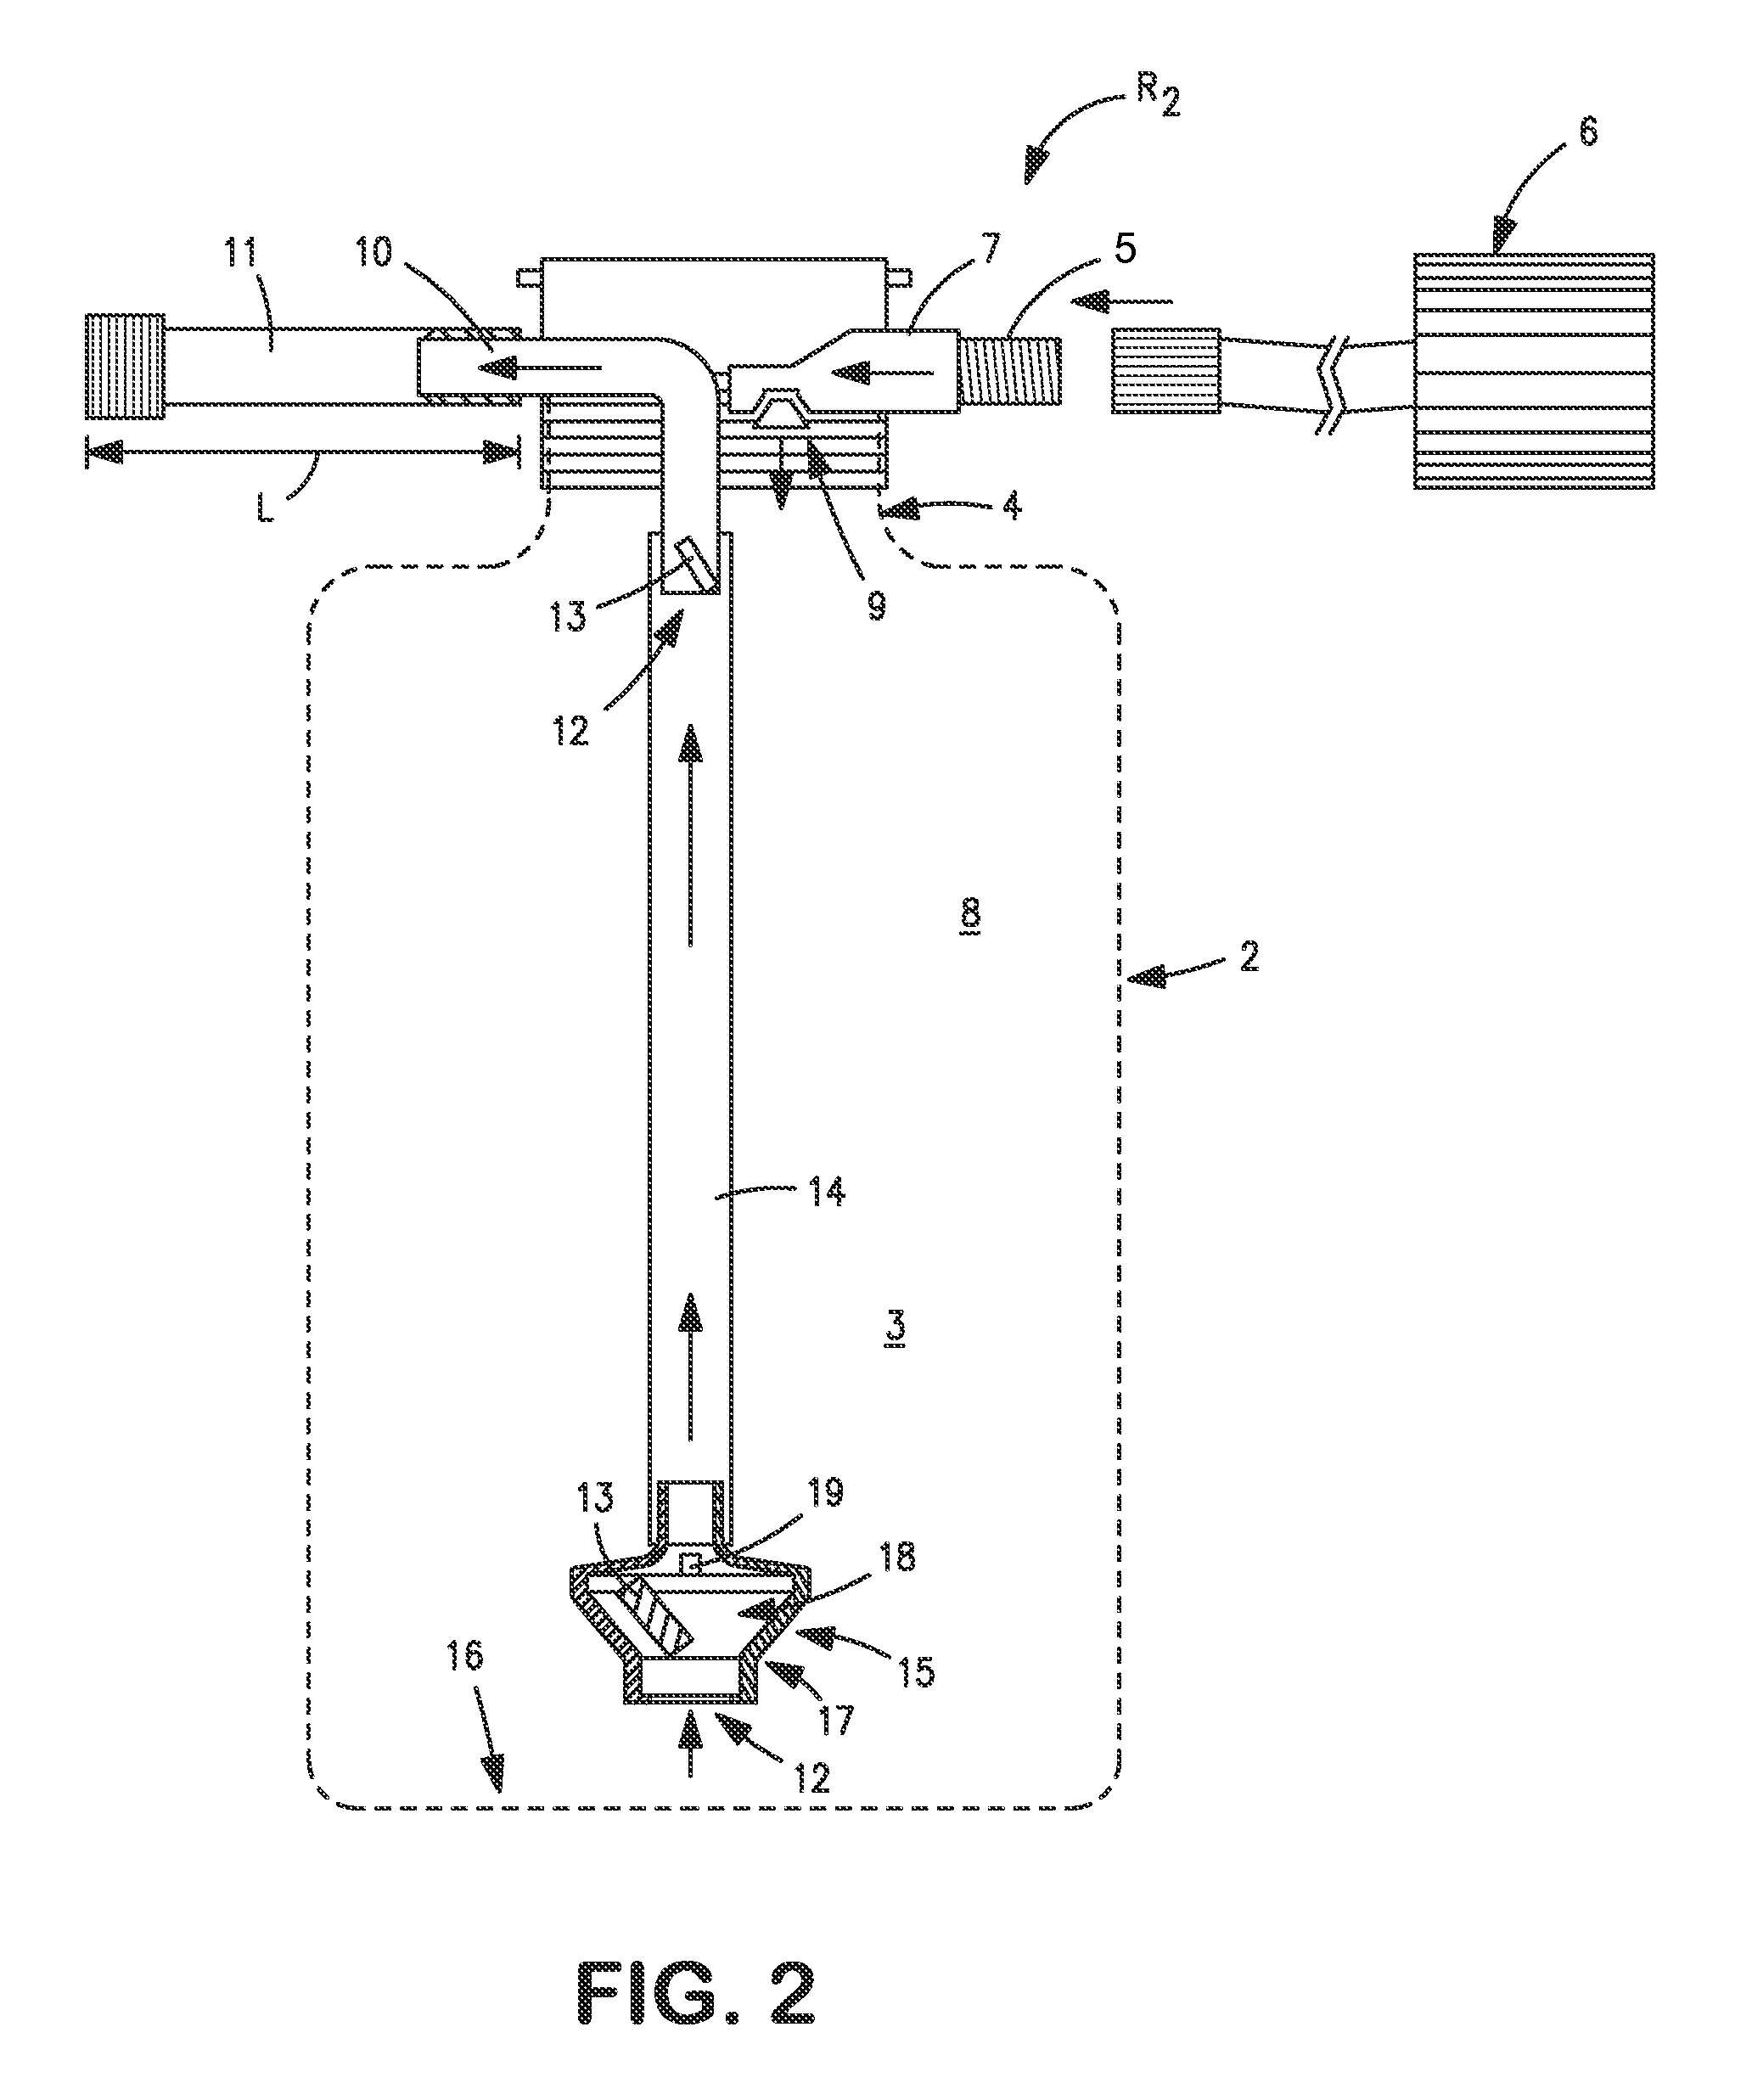 Device for discharging tire sealant from a container